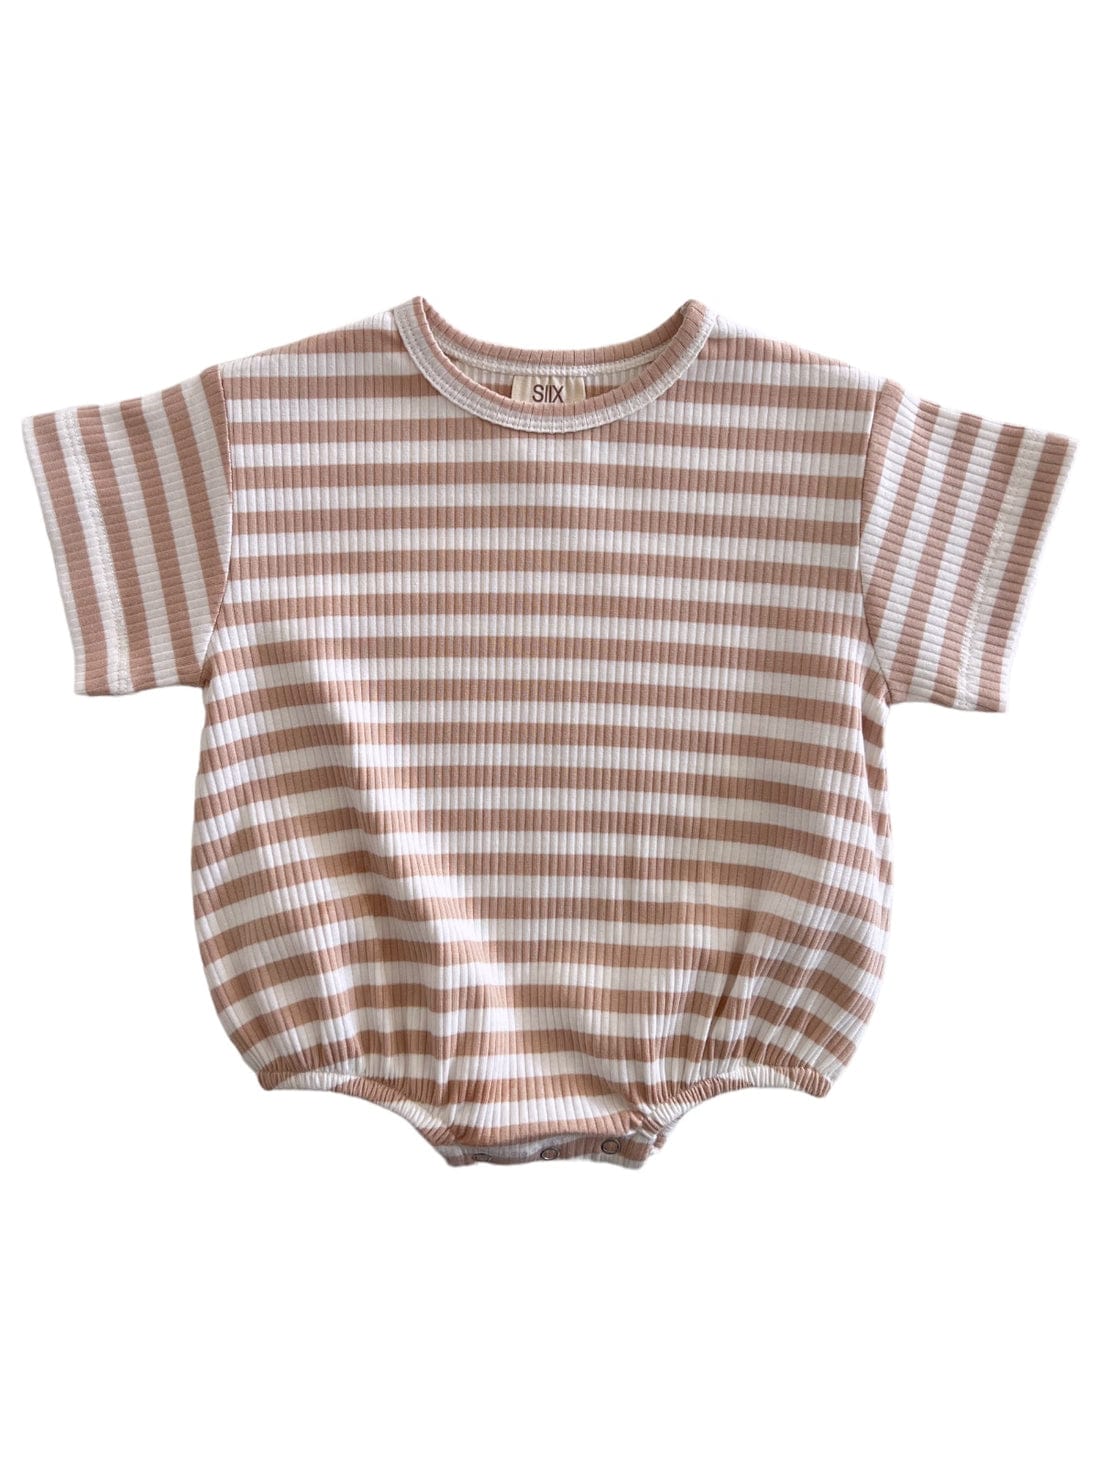 Siix Collection Baby Romper SIIX Collection Organic Ribbed Baby T-Shirt Romper (Tan Stripe)